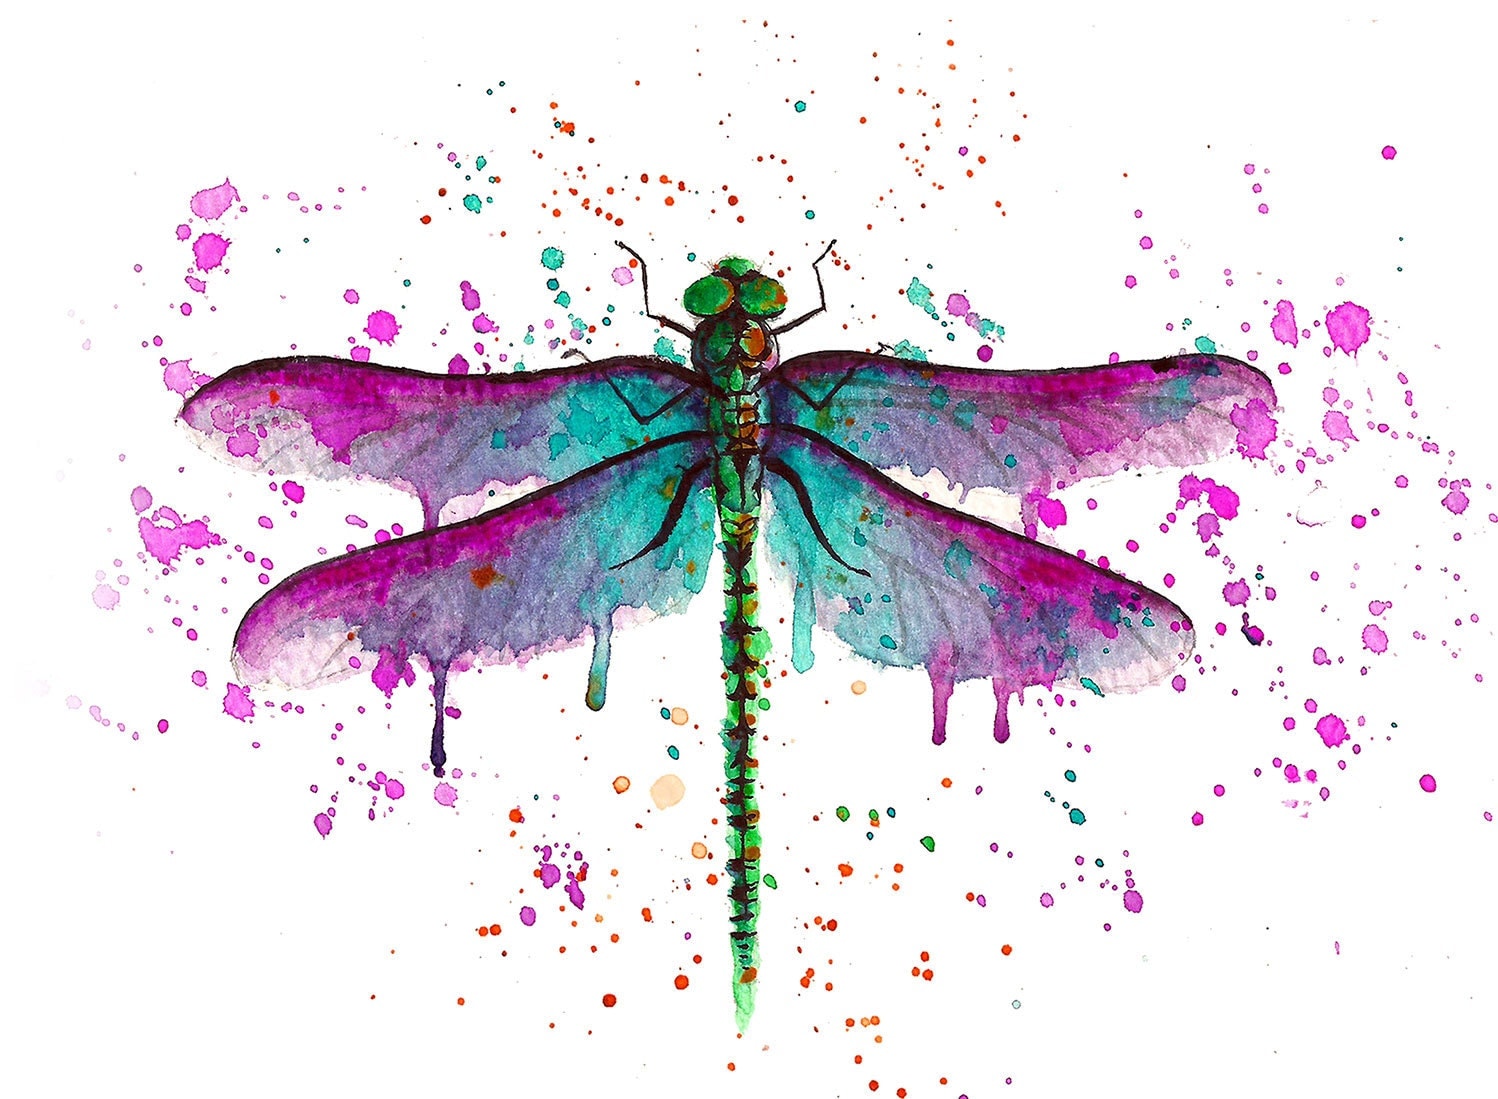 DRAGONFLY watercolour painting illustration original or print